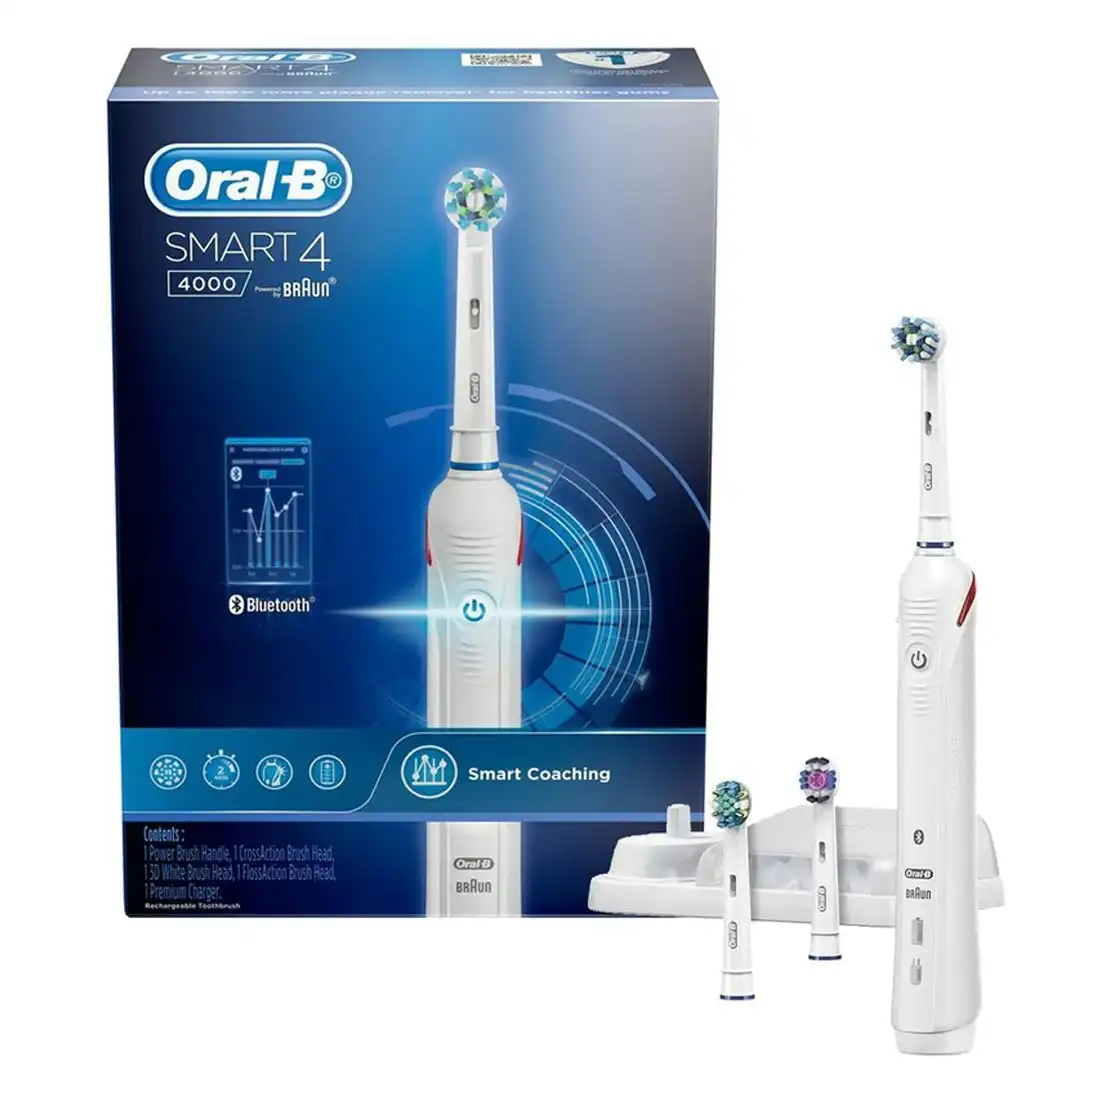 Oral-B Smart 4 4000 Electric Toothbrush - White